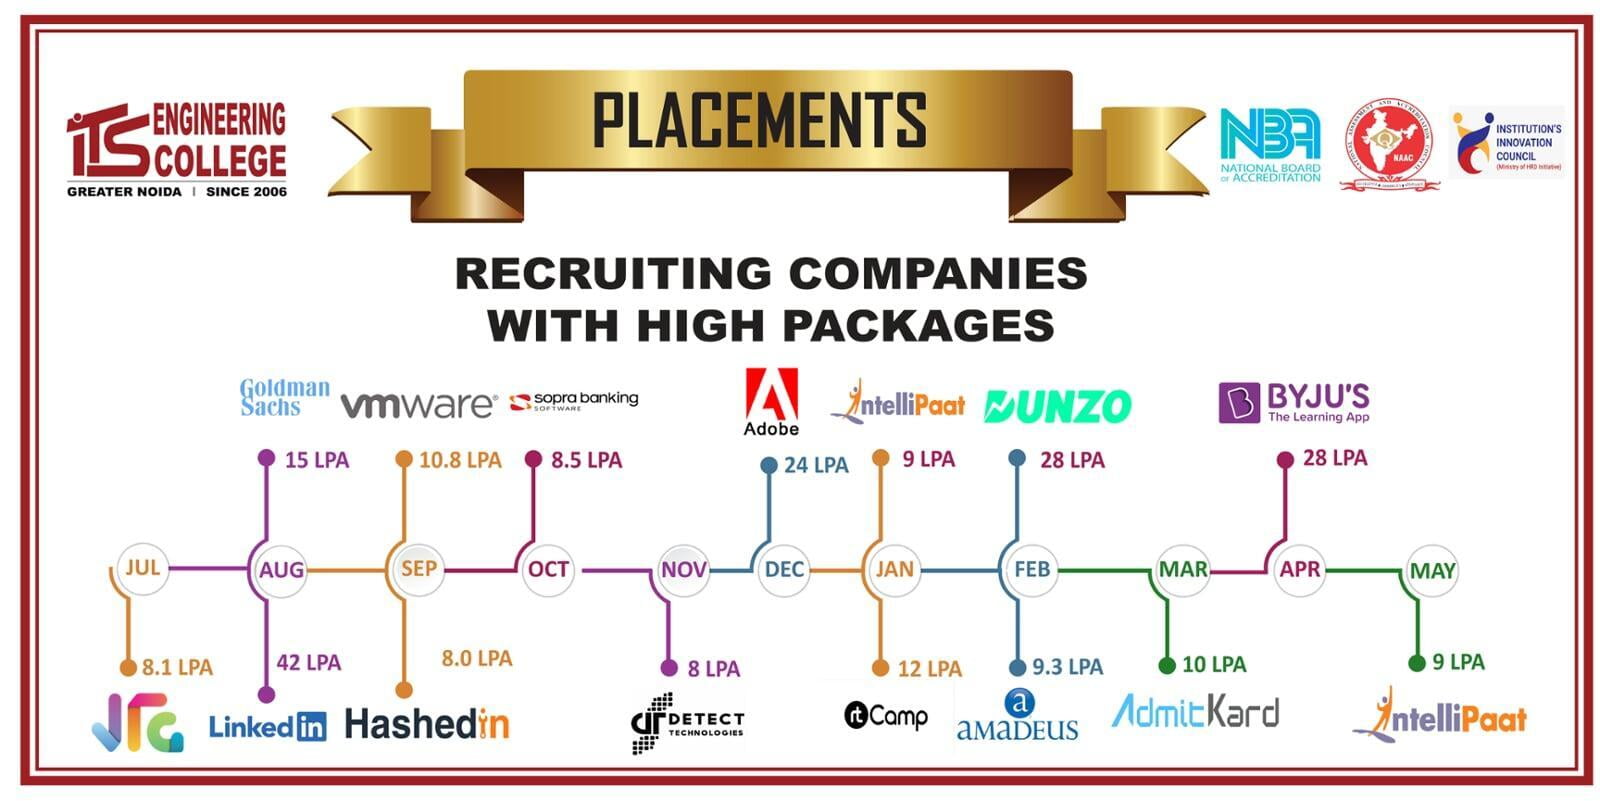 Recruiting companies with high packages ITS Engineering College